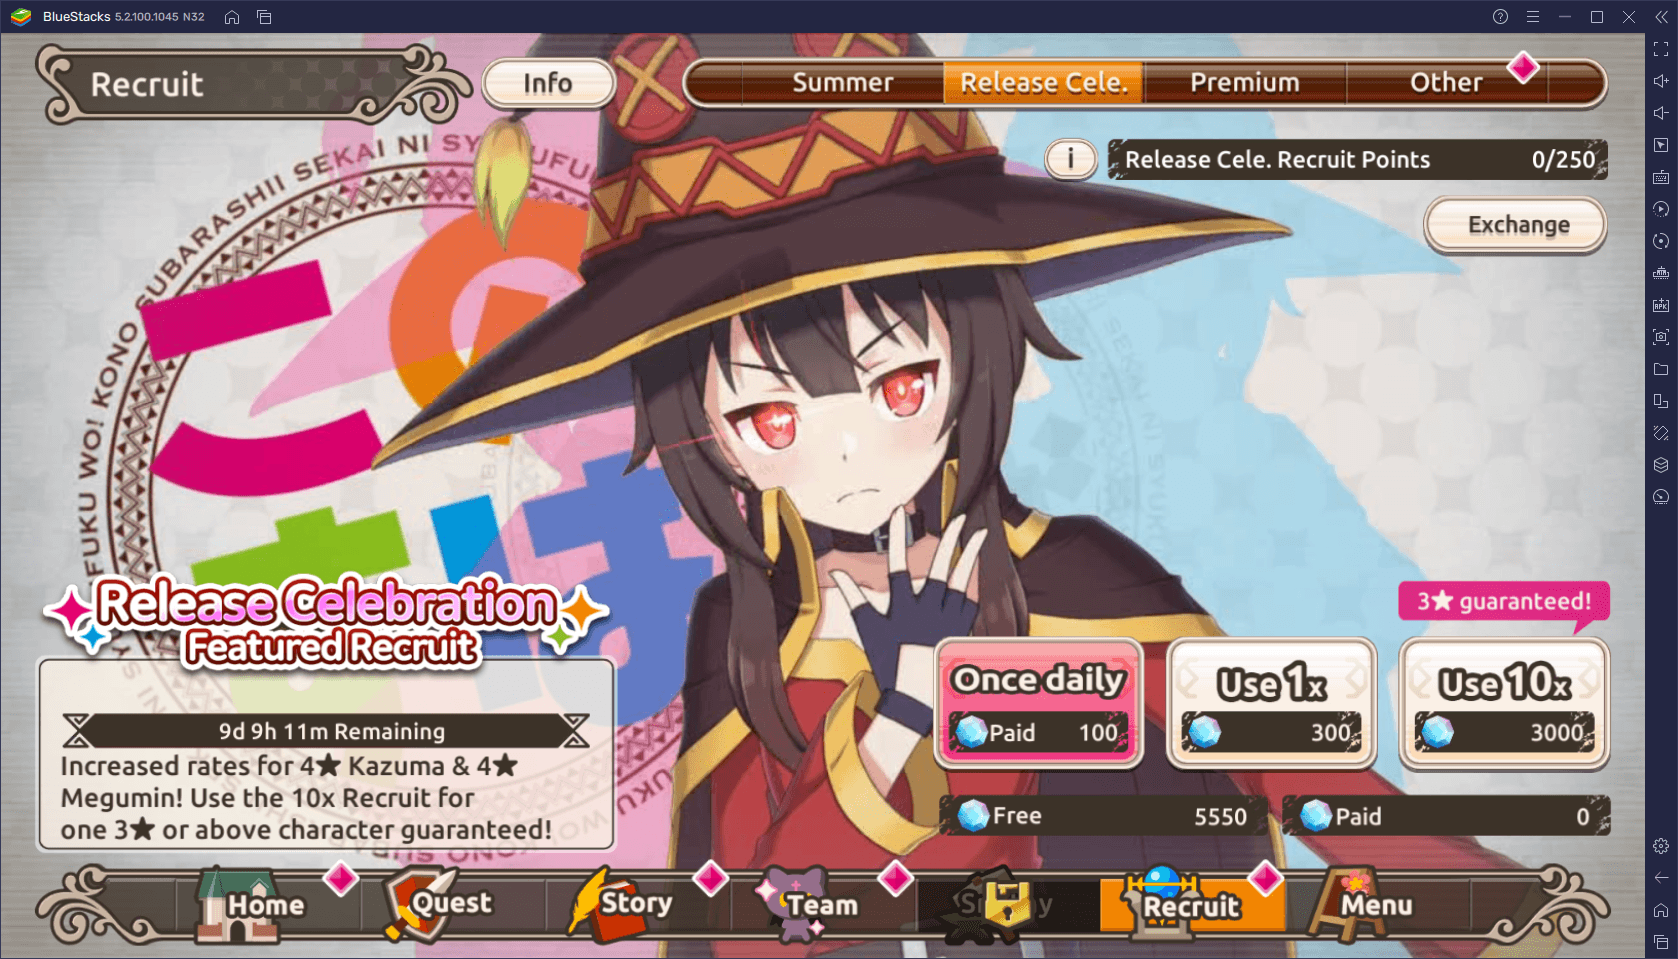 Reroll Guide for KonoSuba: Fantastic Days - How to Obtain the Best Characters Early On